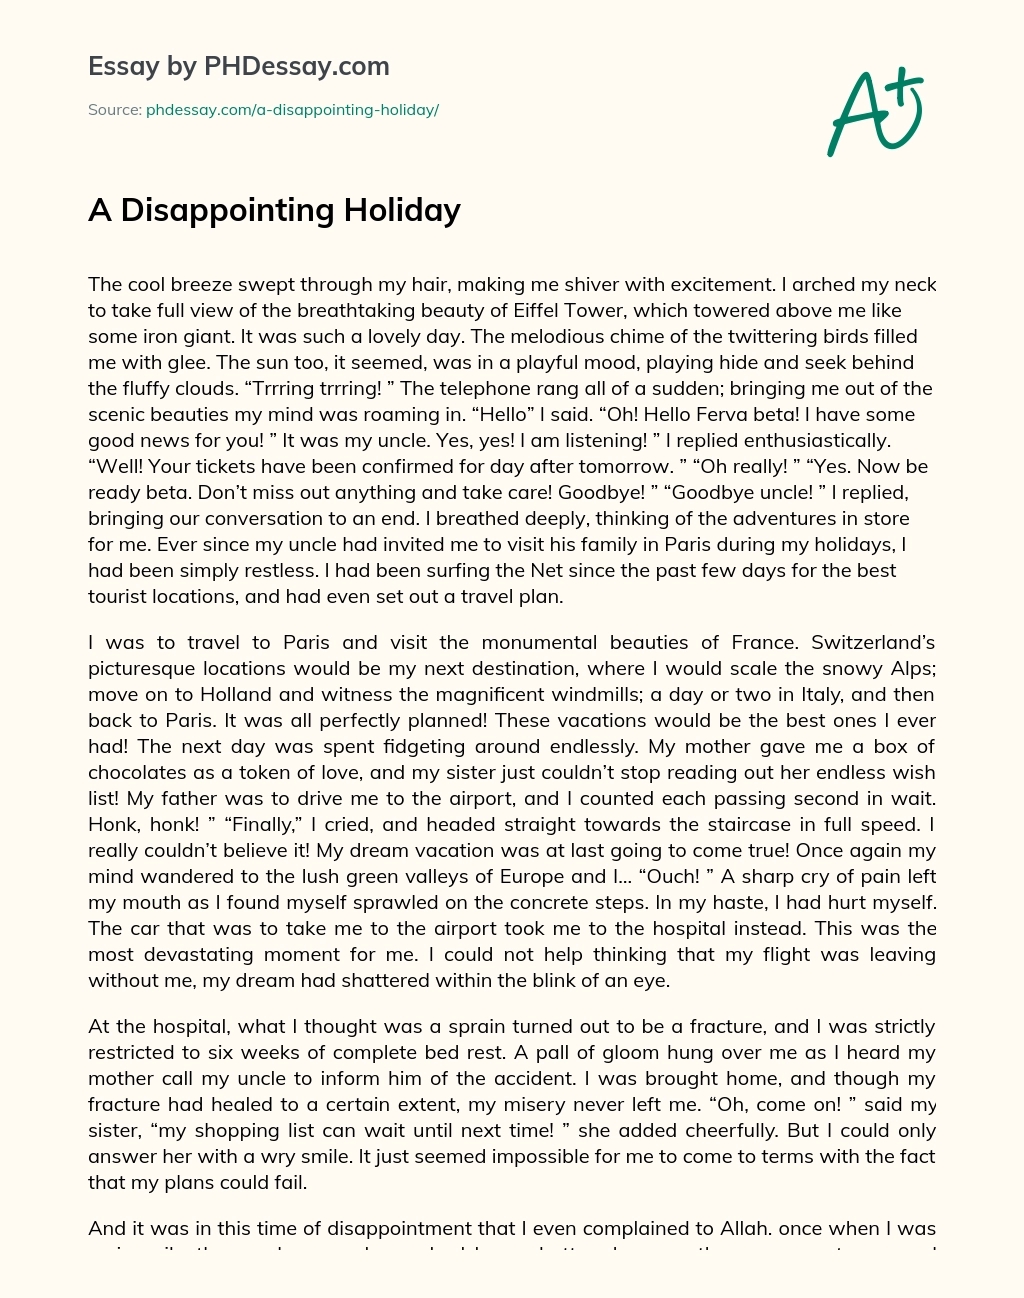 A Disappointing Holiday essay